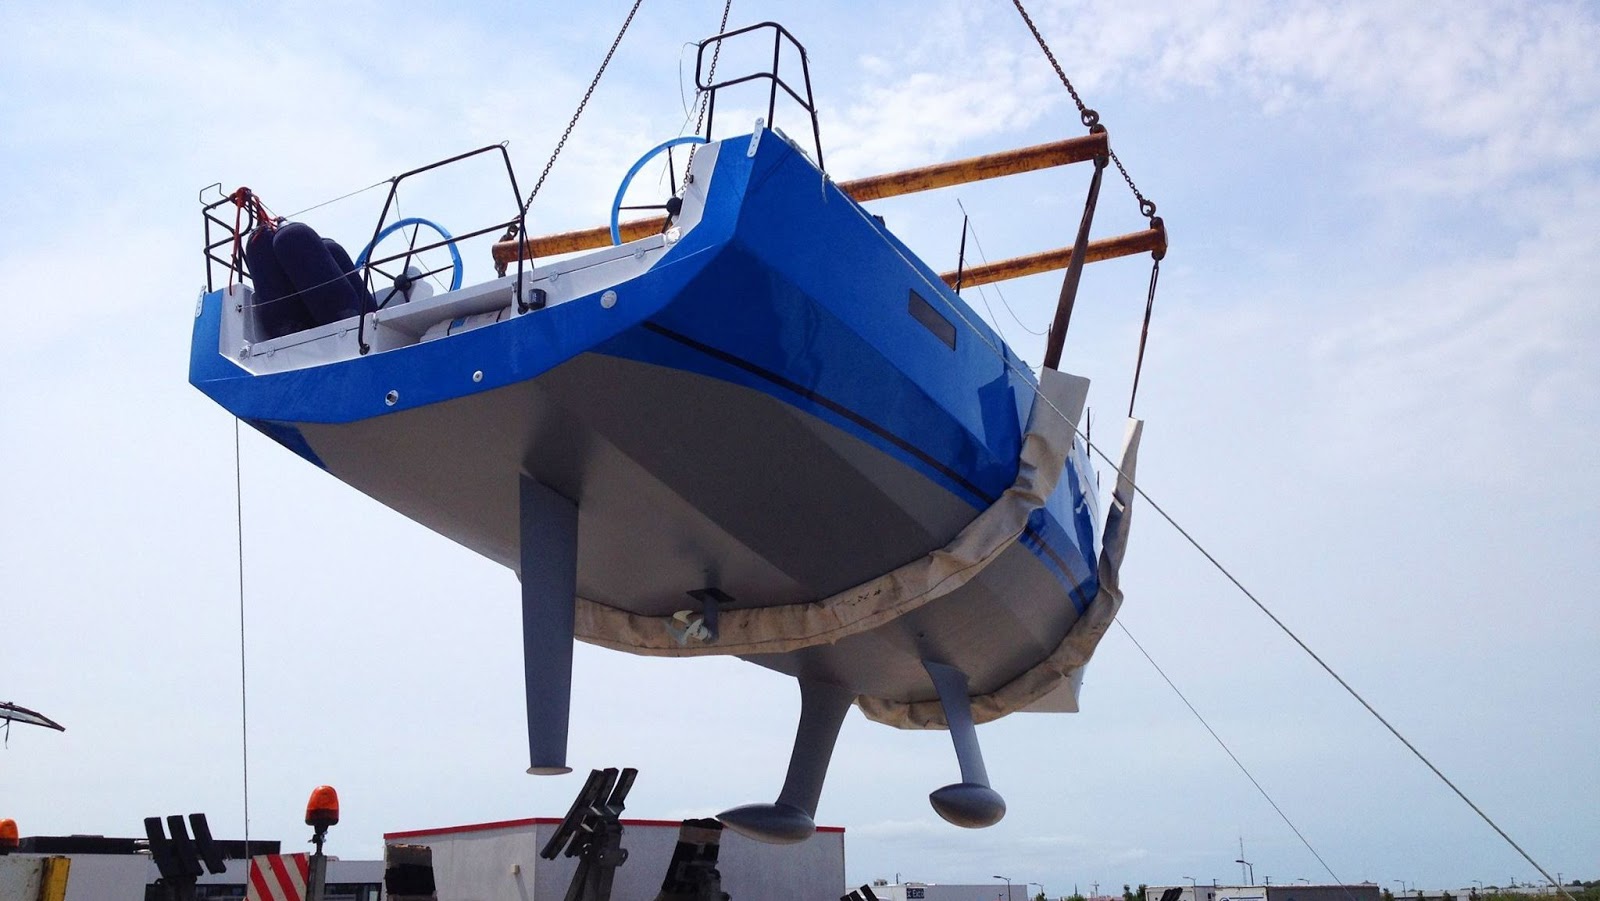 Interesting Sailboats: RM YACHTS, BANKRUPTCY AND A SHAMEFUL RECOVERY